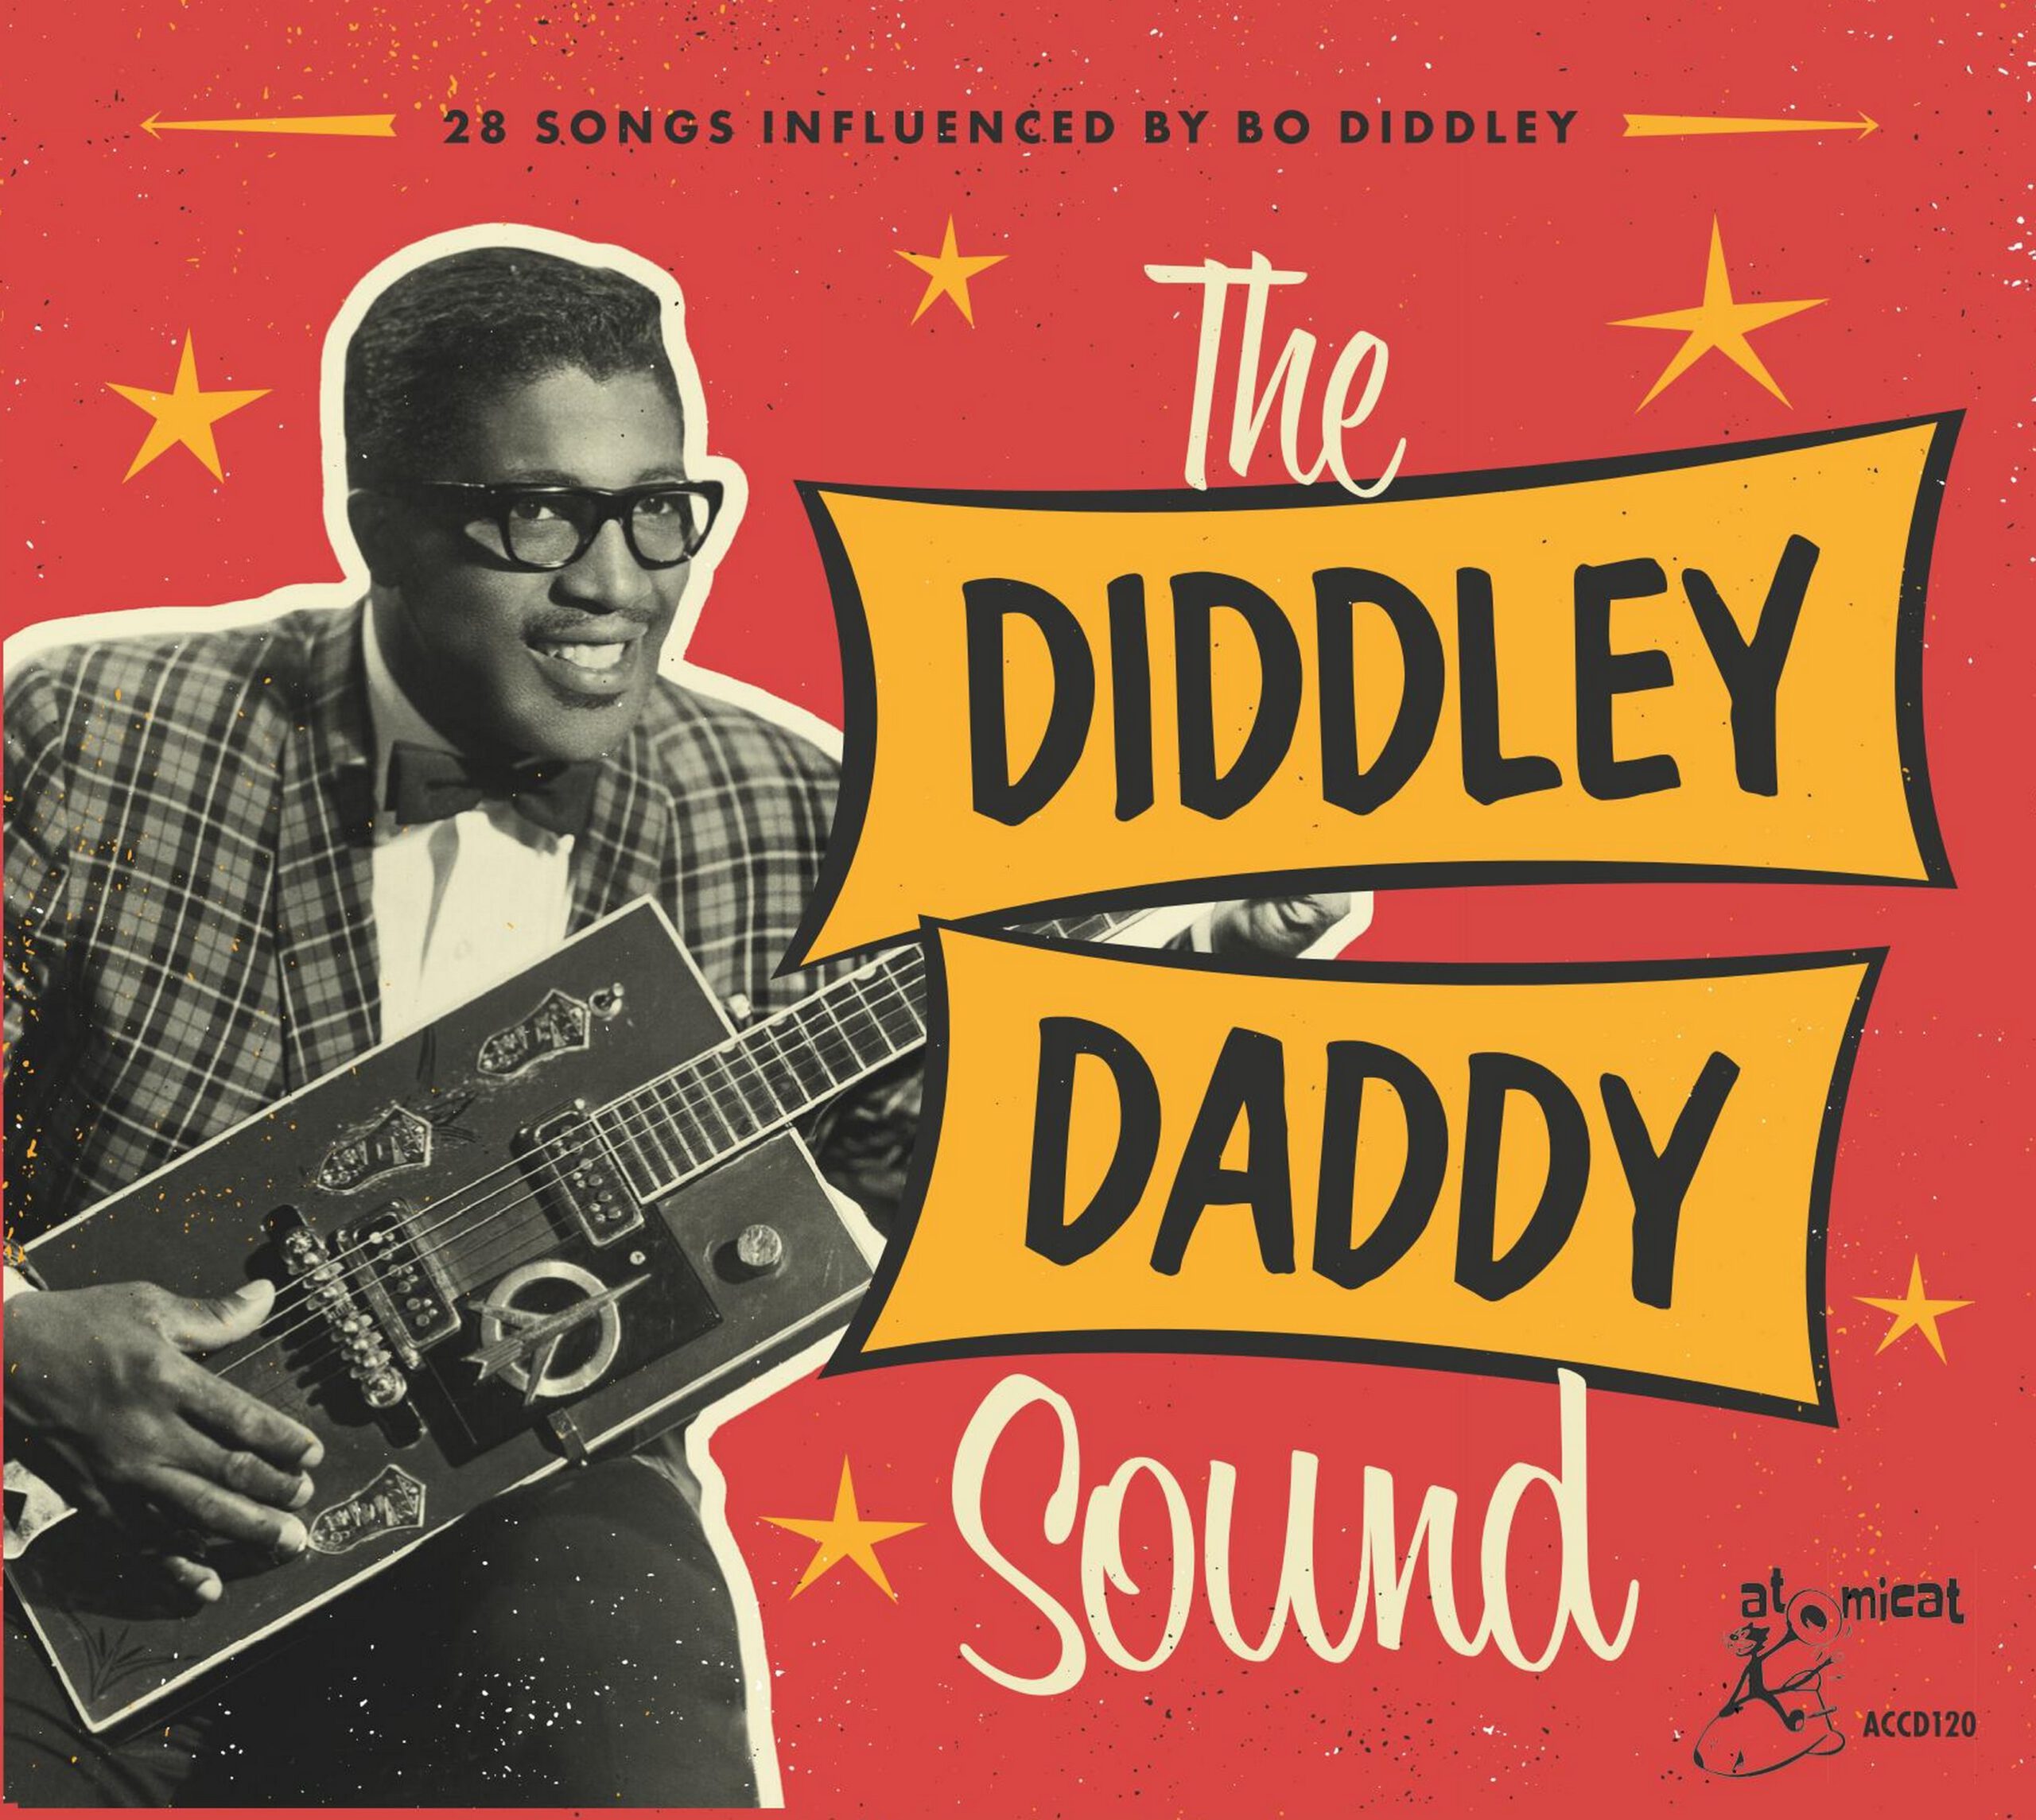 The Diddley Daddy Sound – 28 Songs Inspired By Bo Diddley